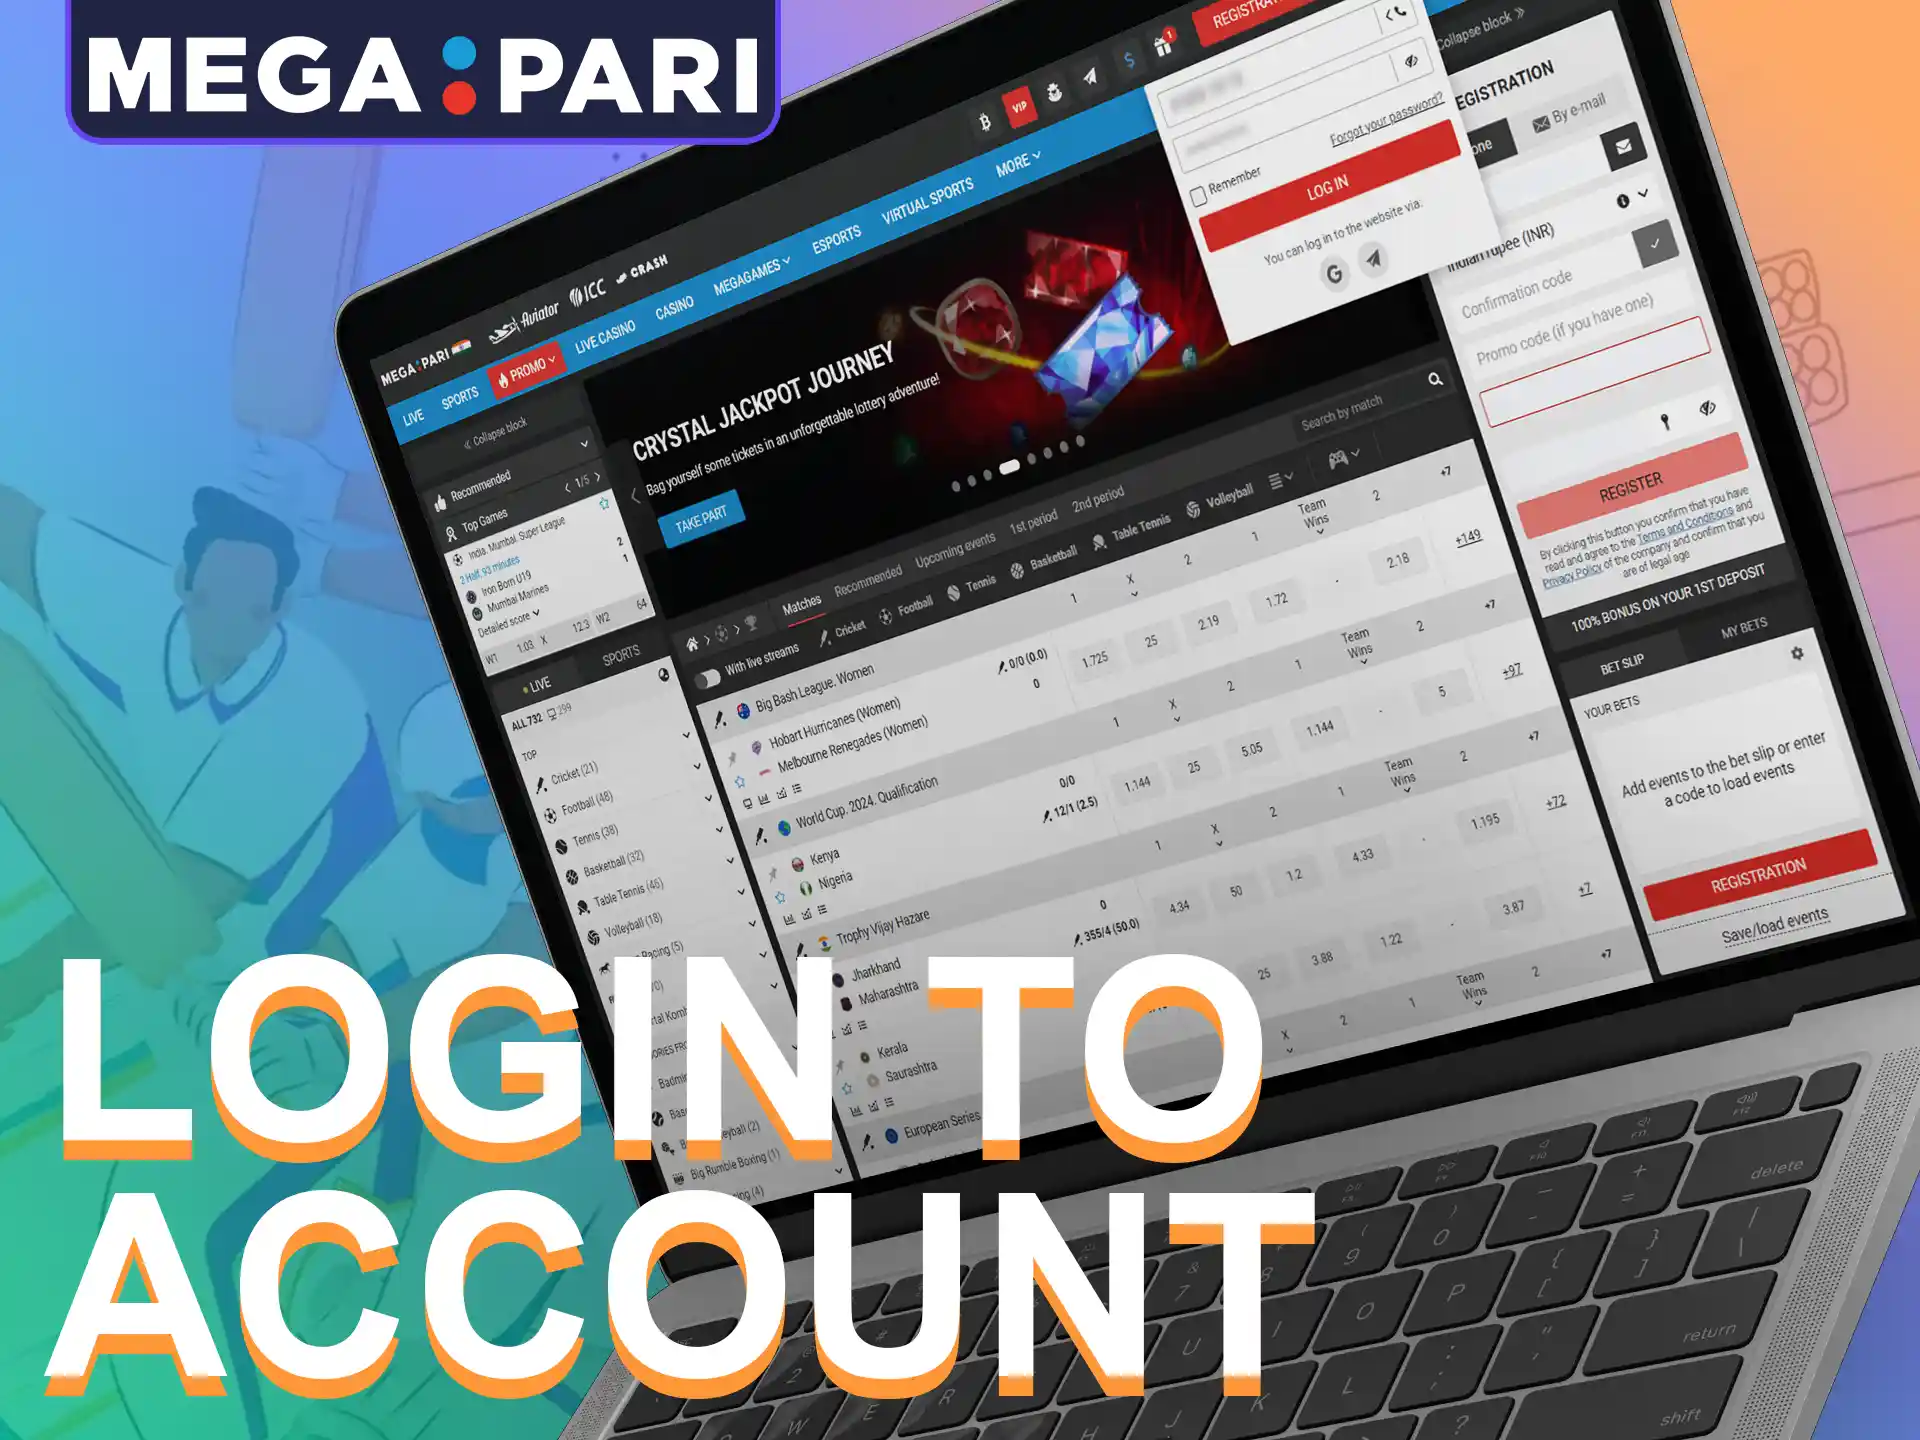 Log in to your Megapari account with your username and password and start playing.